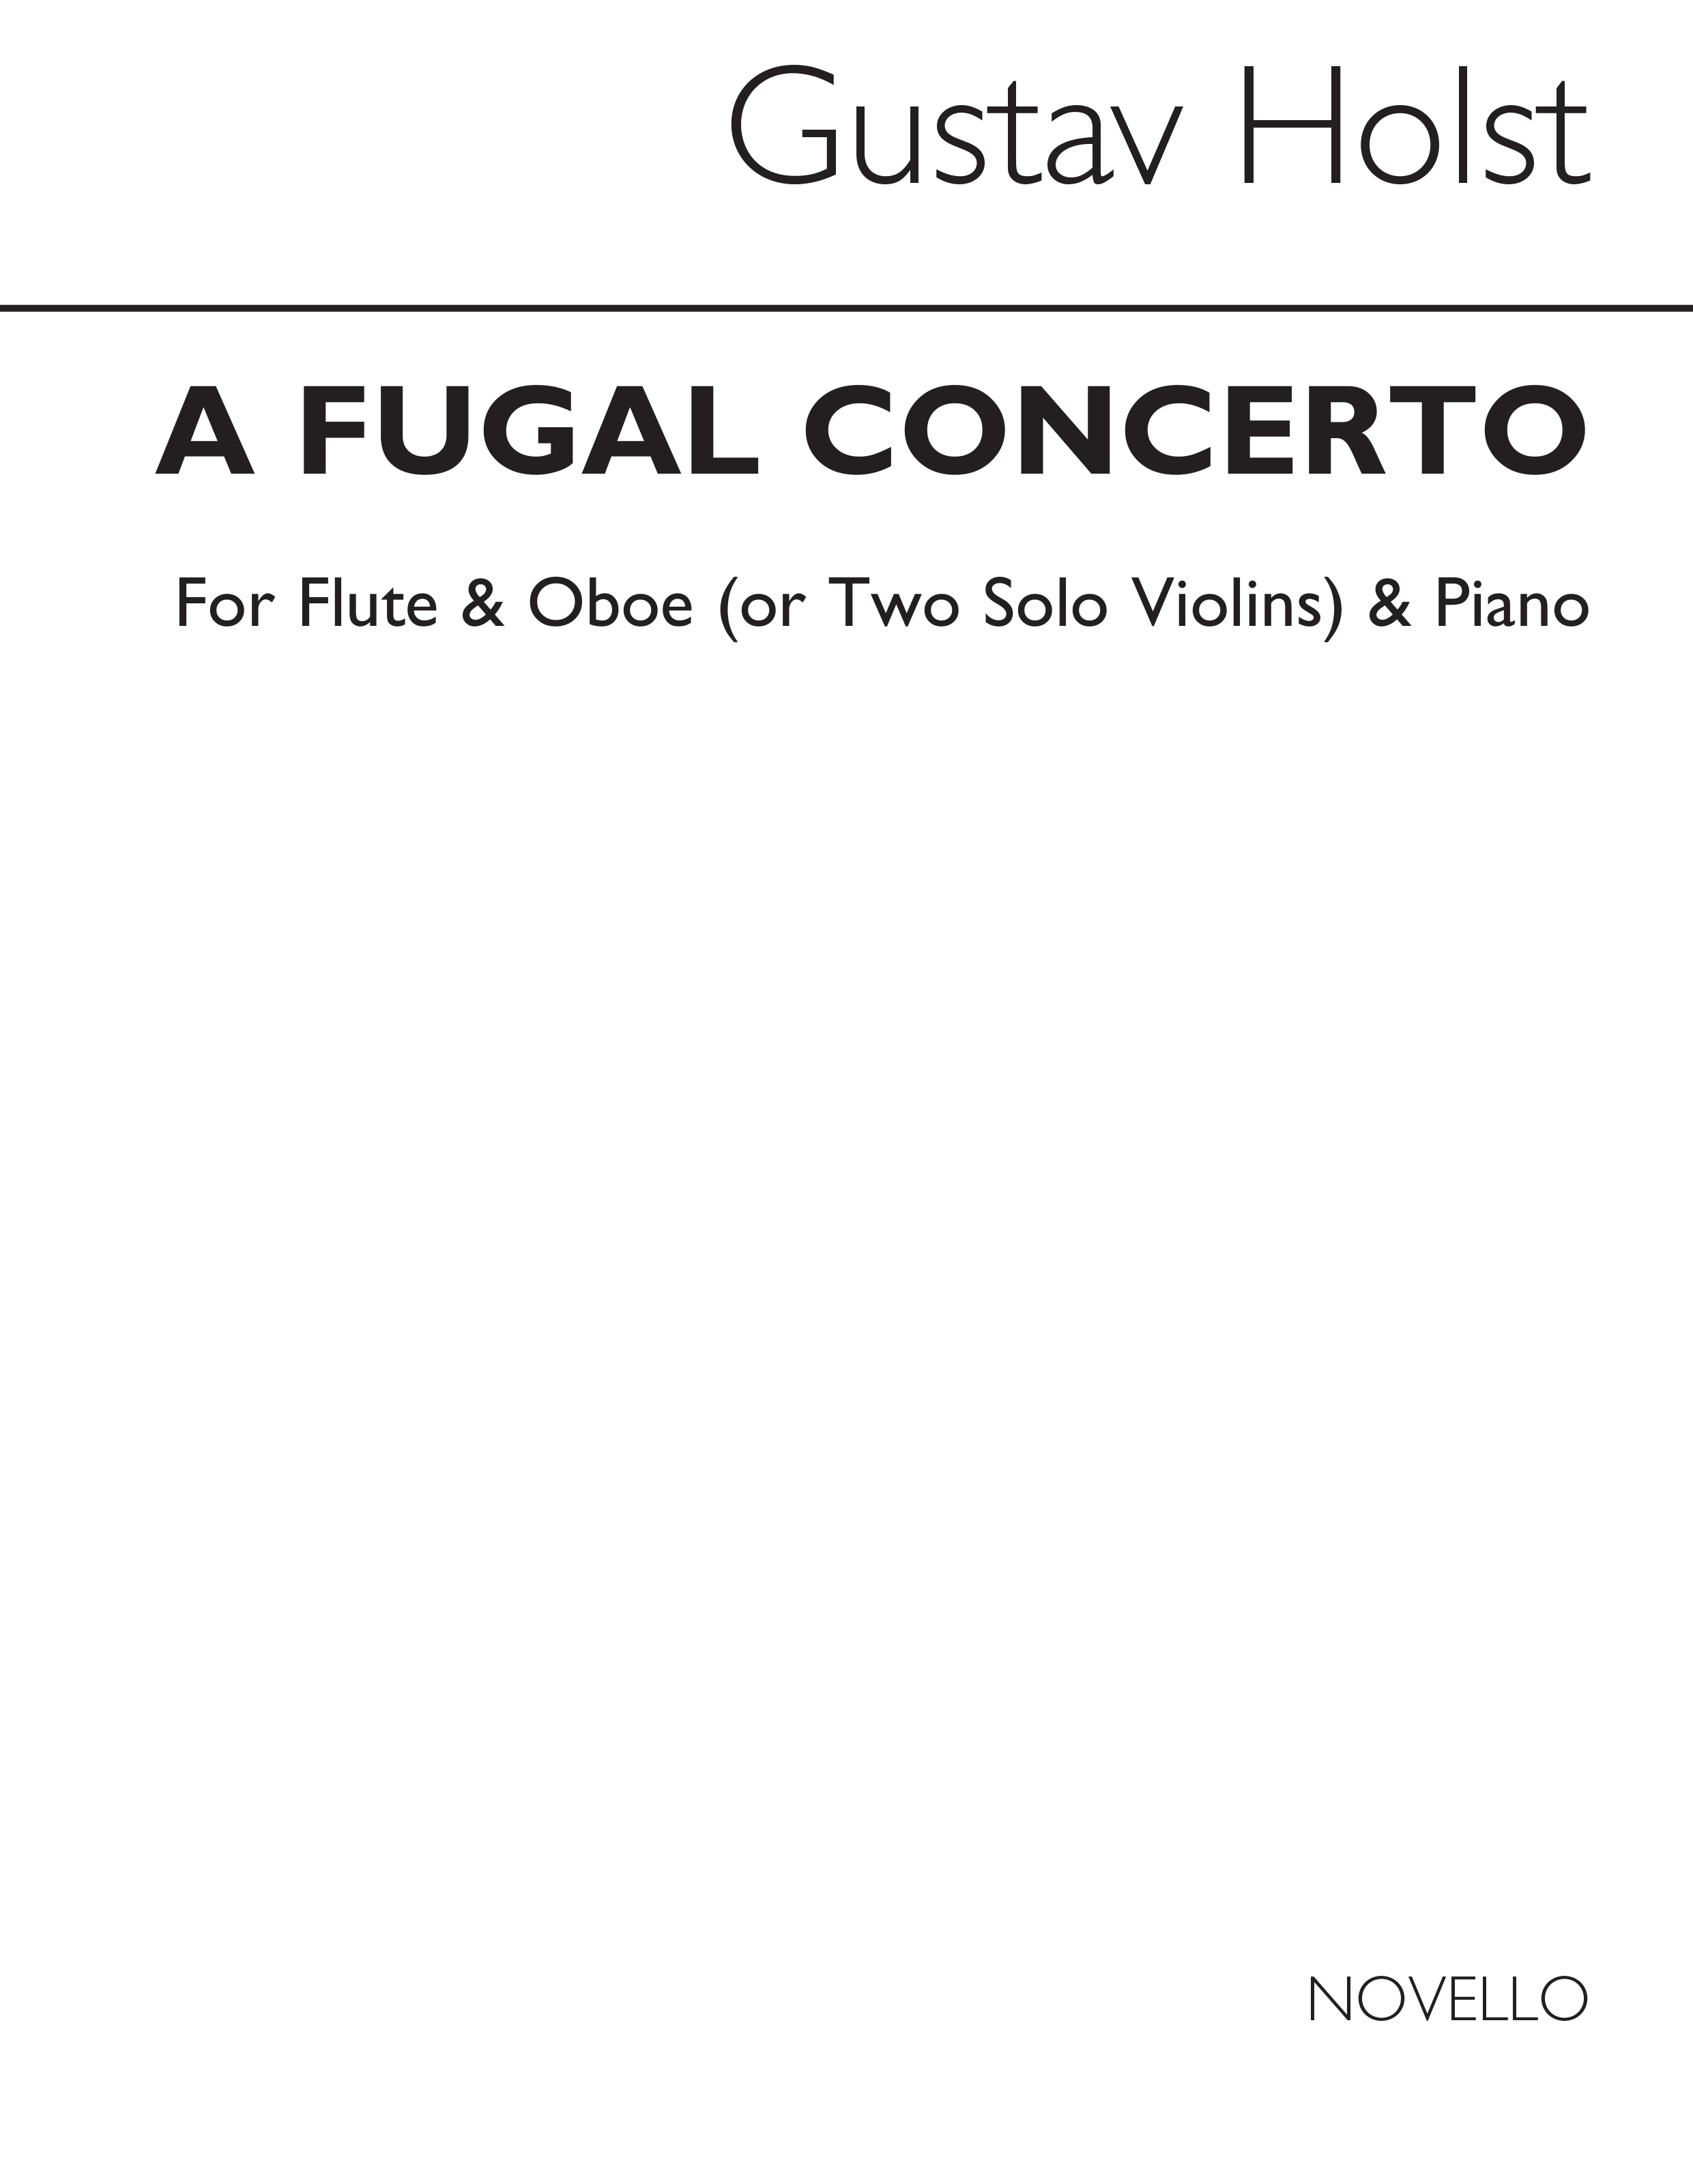 Gustav Holst: Fugal Concerto Op.40 No.2 (Flute Oboe and Piano): Flute & Oboe: